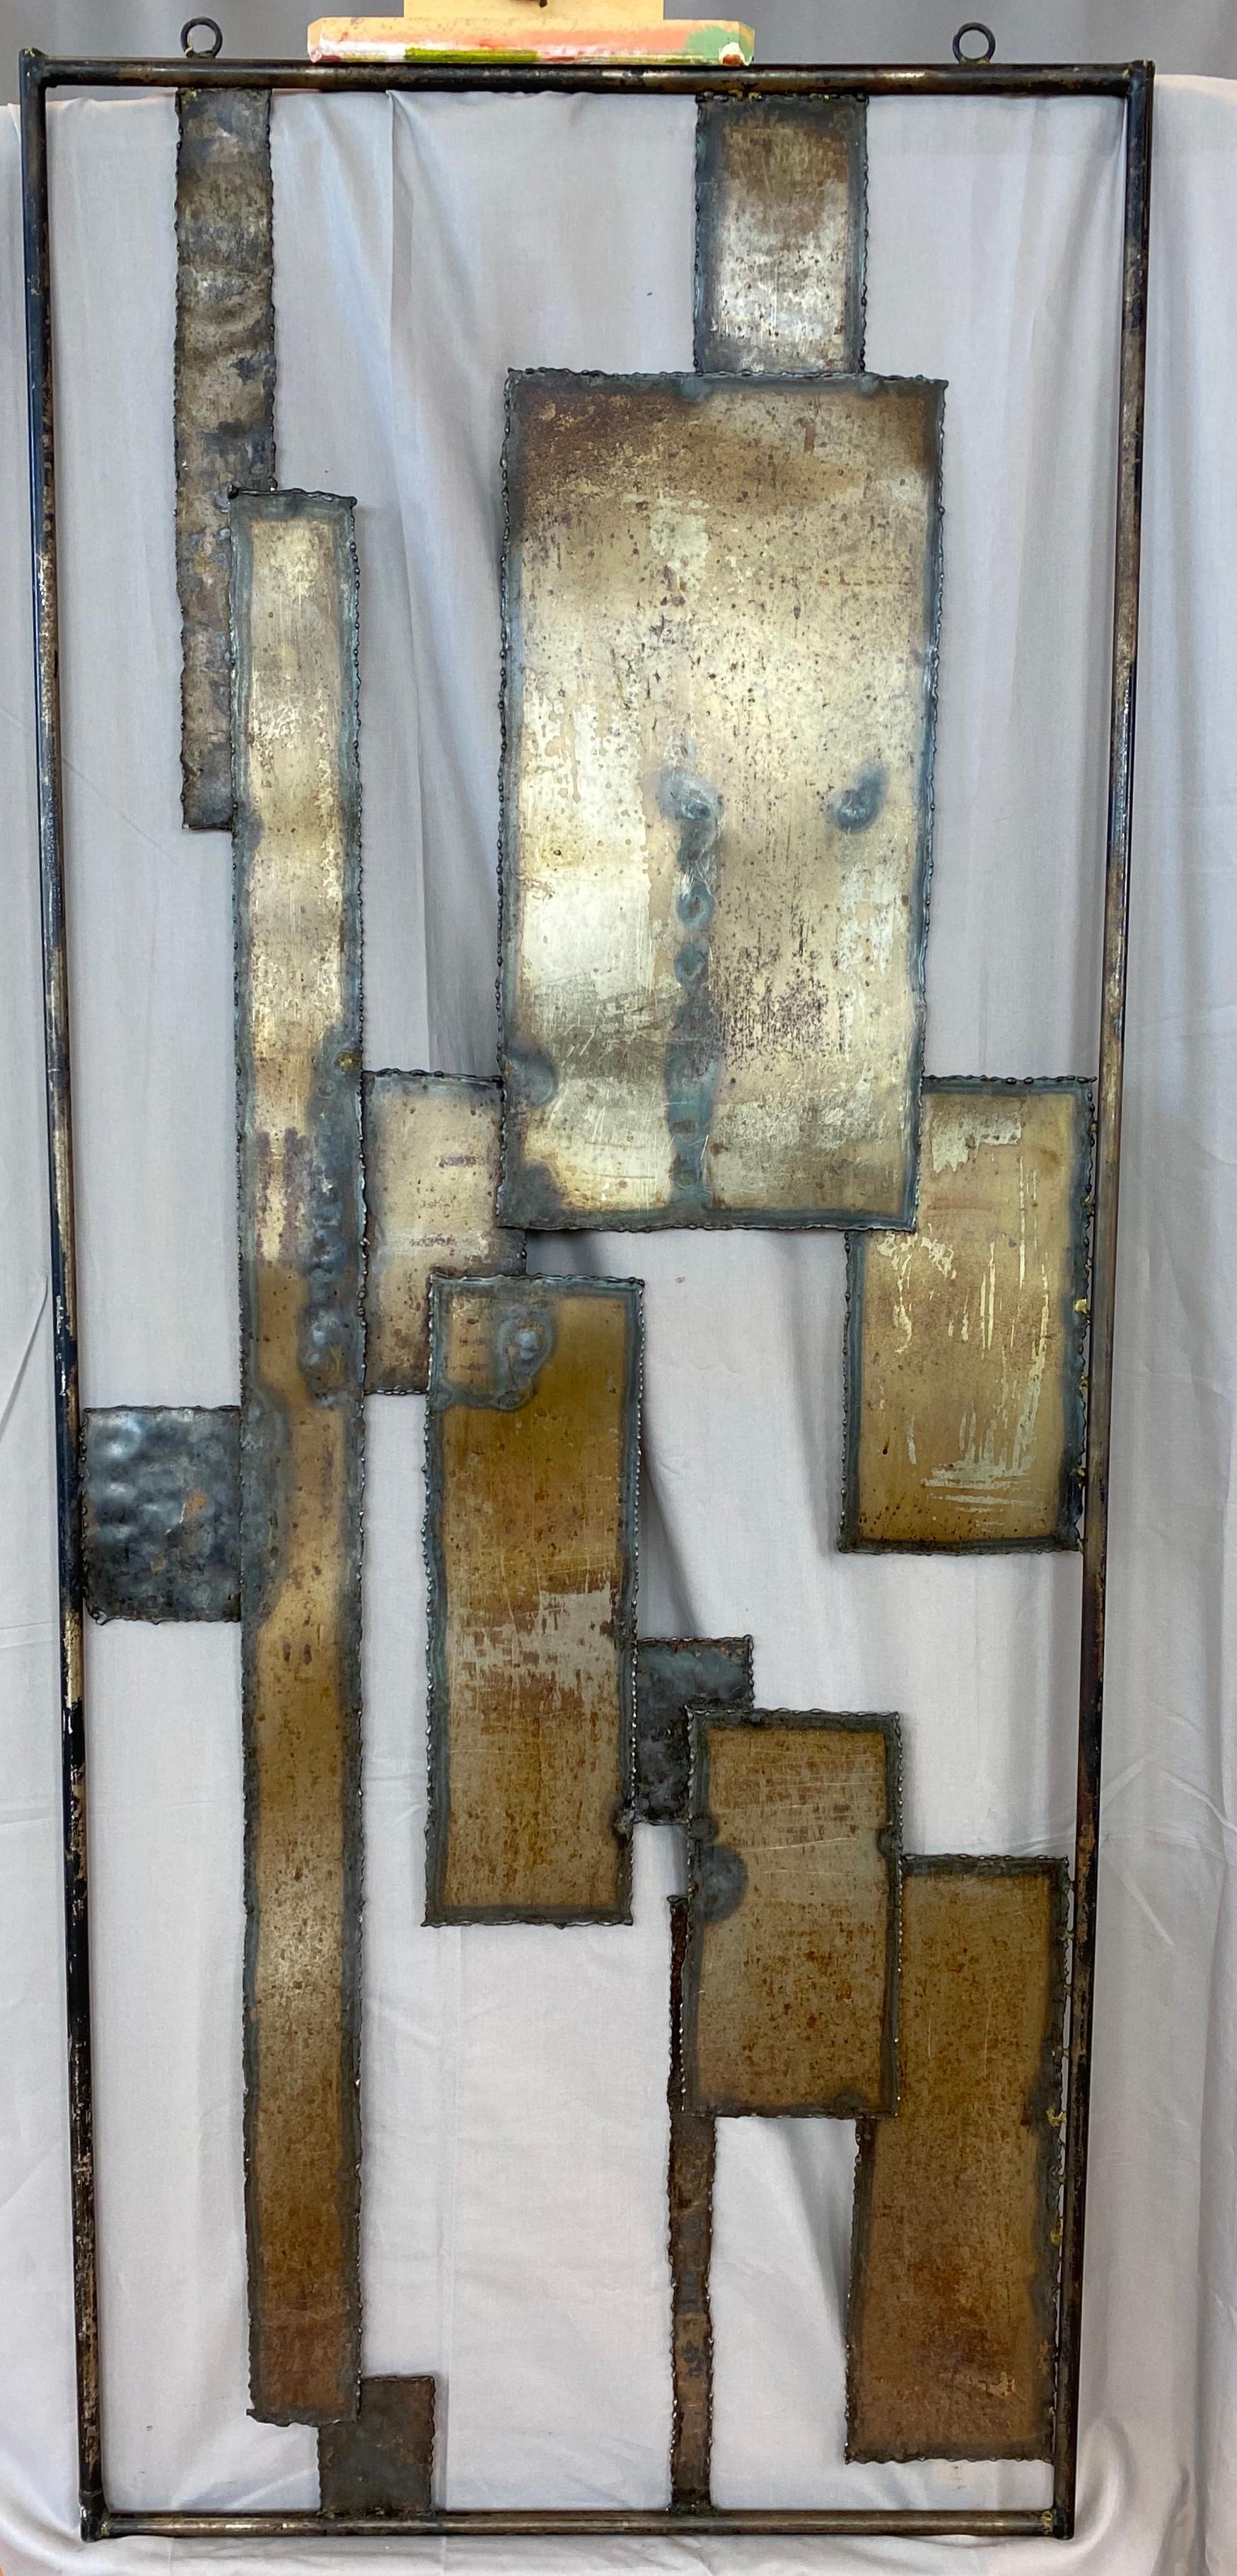 Offered here is a monumental in size brutalist in style wall mount sculpture circa 1970s. Unsigned.
The sculpture has the same feel of the techniques you'll find on the works of Silas Seandel. 
Made of steel and brass with shapes of squares,